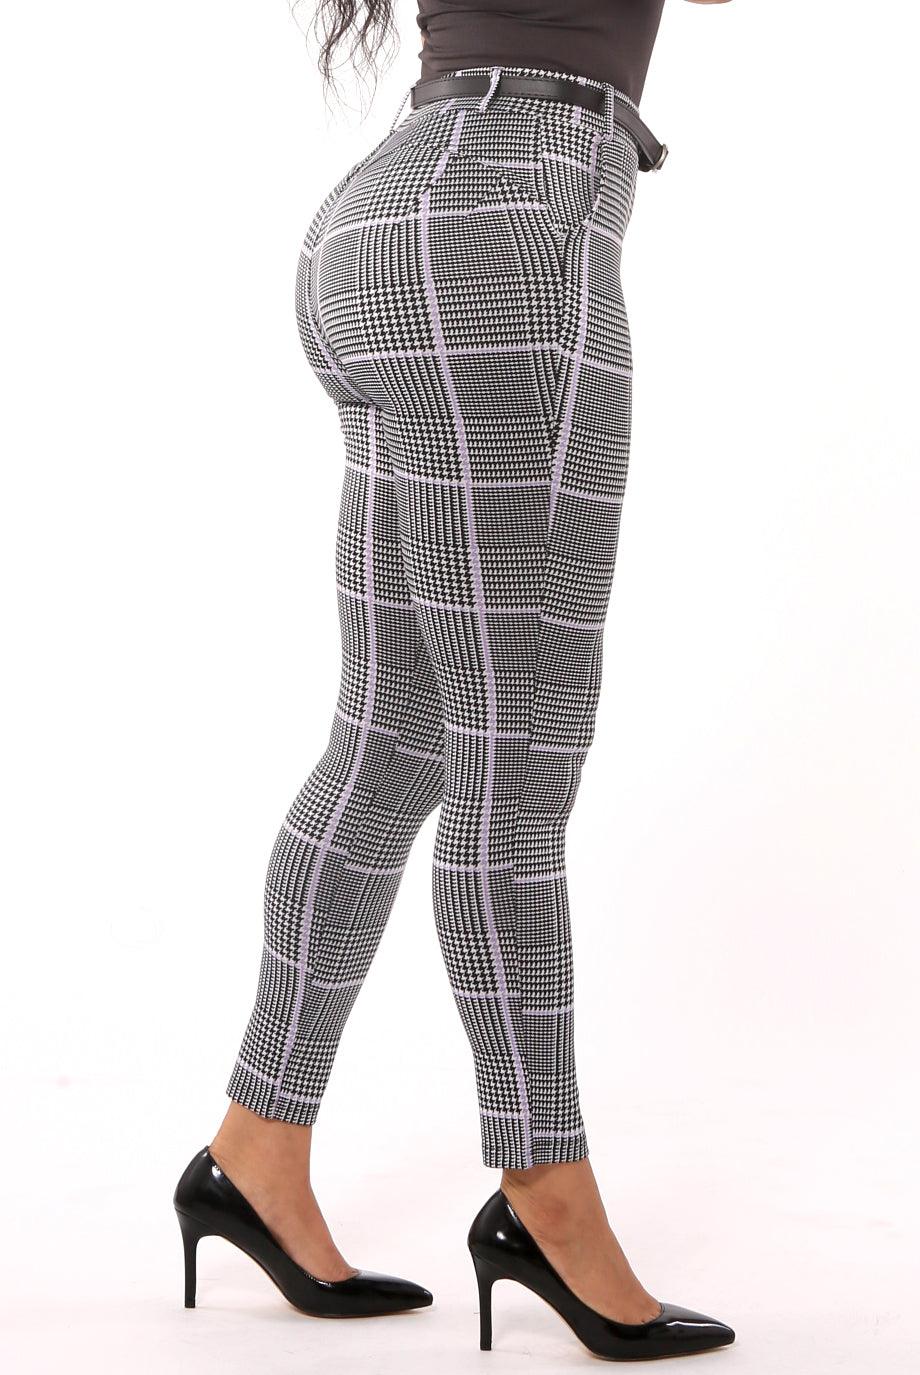 Sculpting Treggings With Faux Leather Belt - Black, White, Mauve Plaid Houndstooth - SHOSHO Fashion